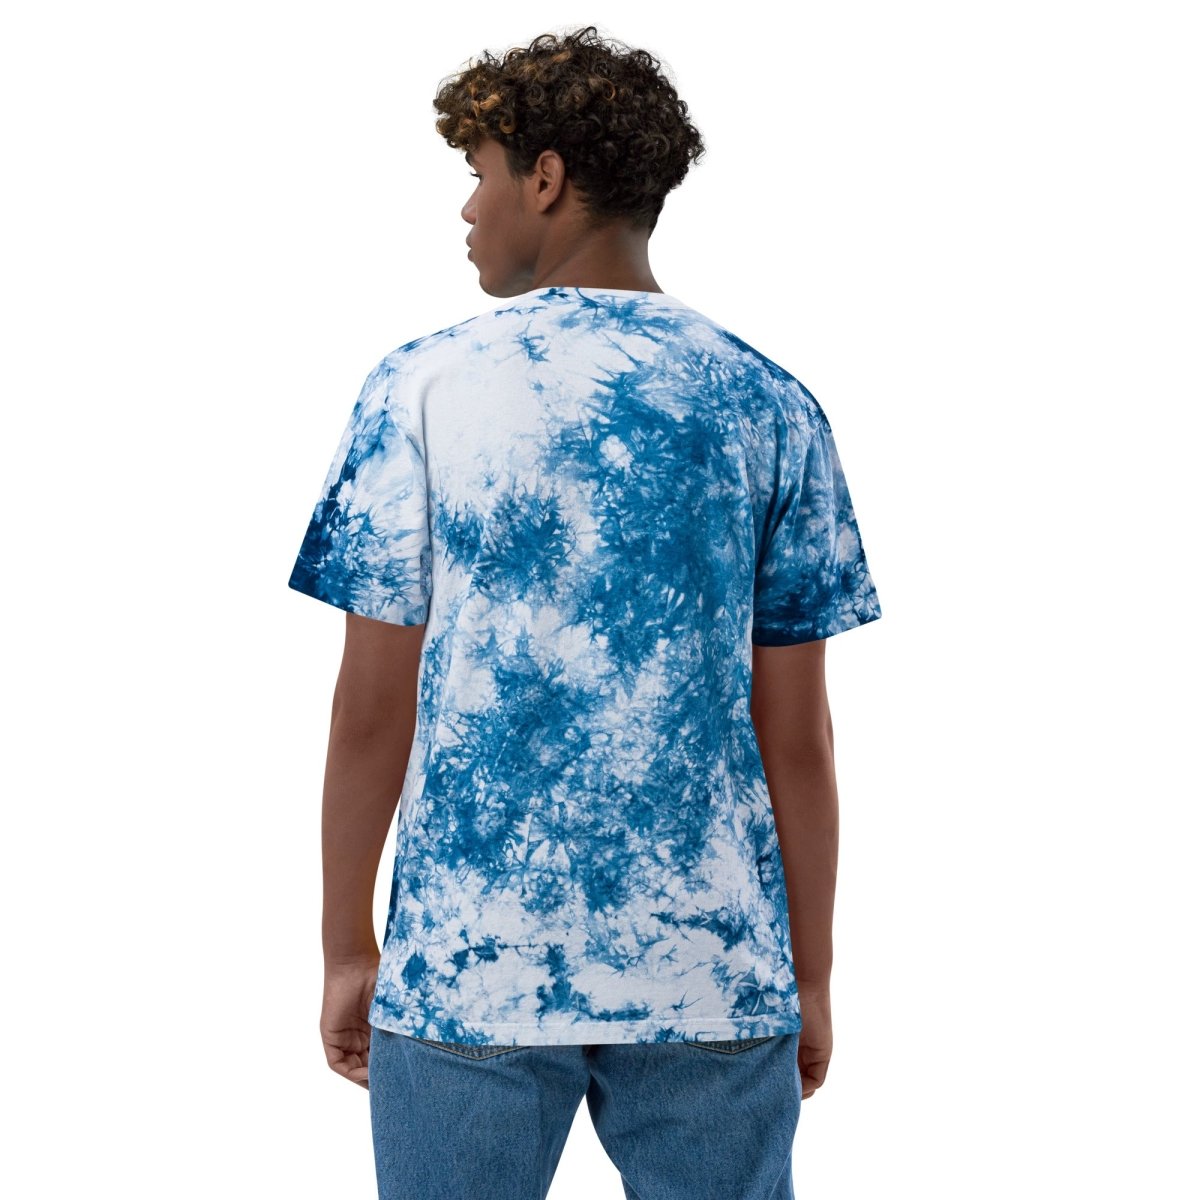 Yes To All Pansexual Oversized Tie-Dye Shirt - On Trend Shirts